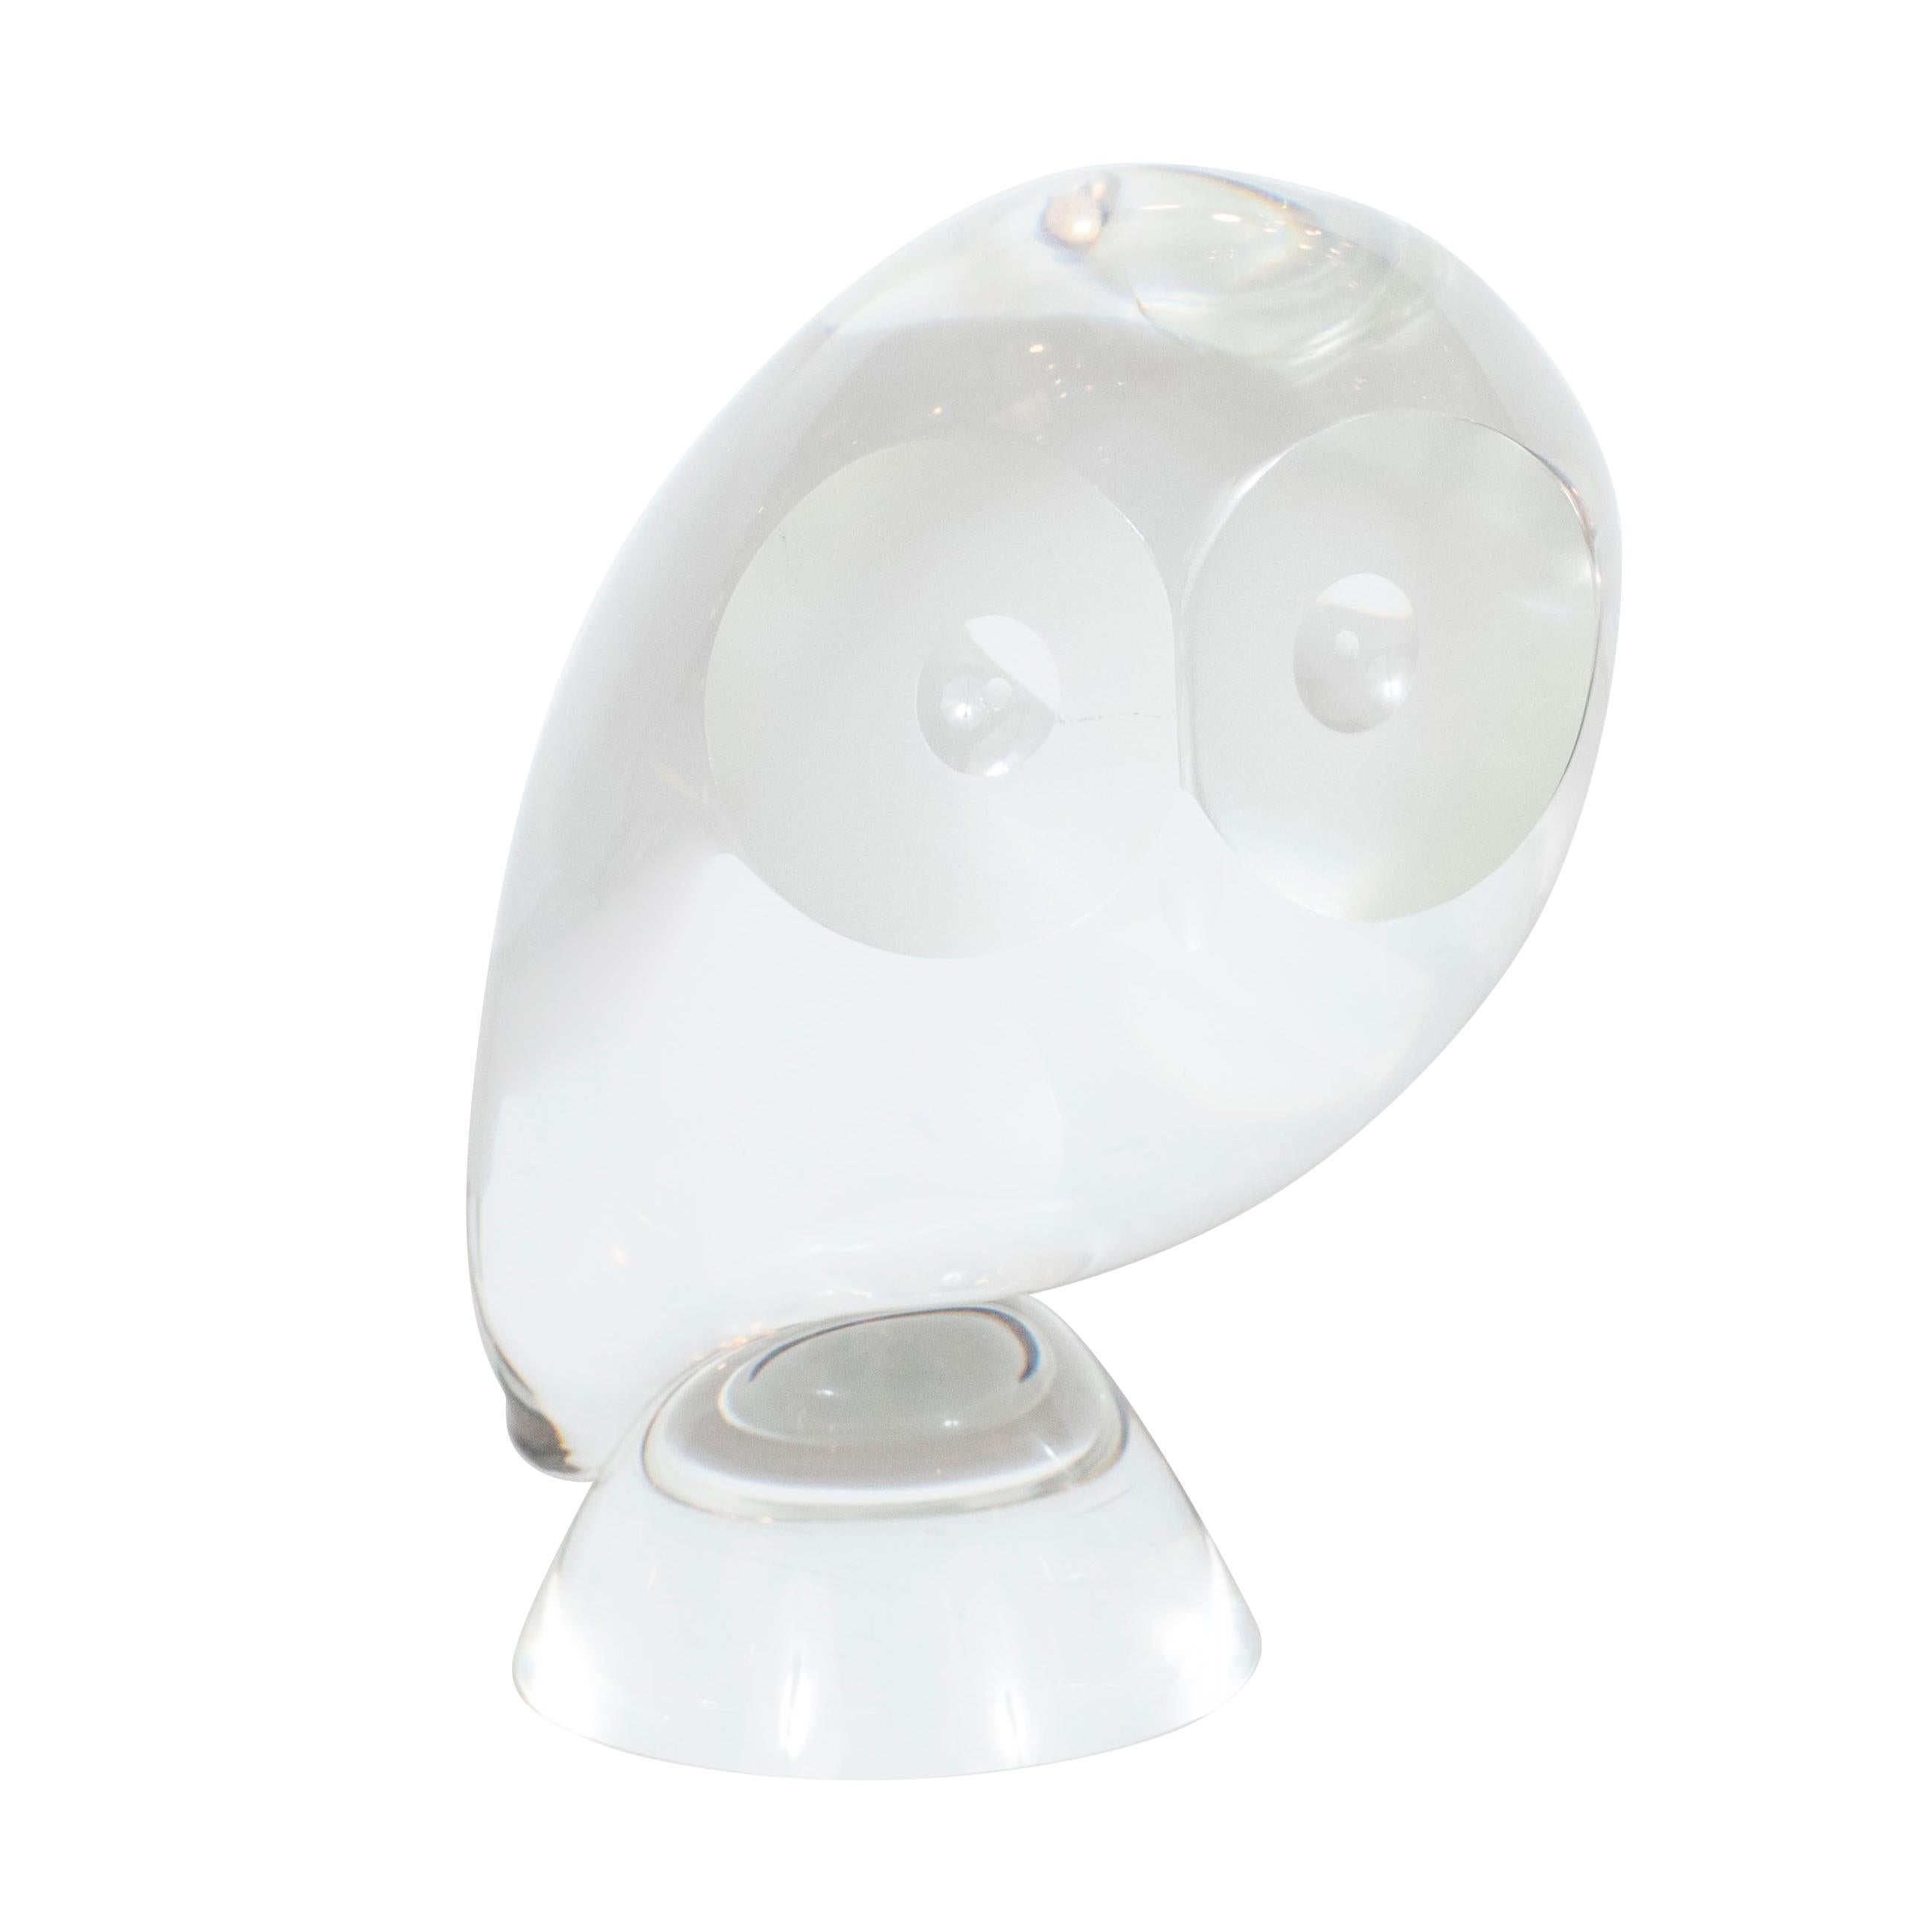 Mid-Century Modern Glass Owl Paperweight/ Decorative Object by Steuben